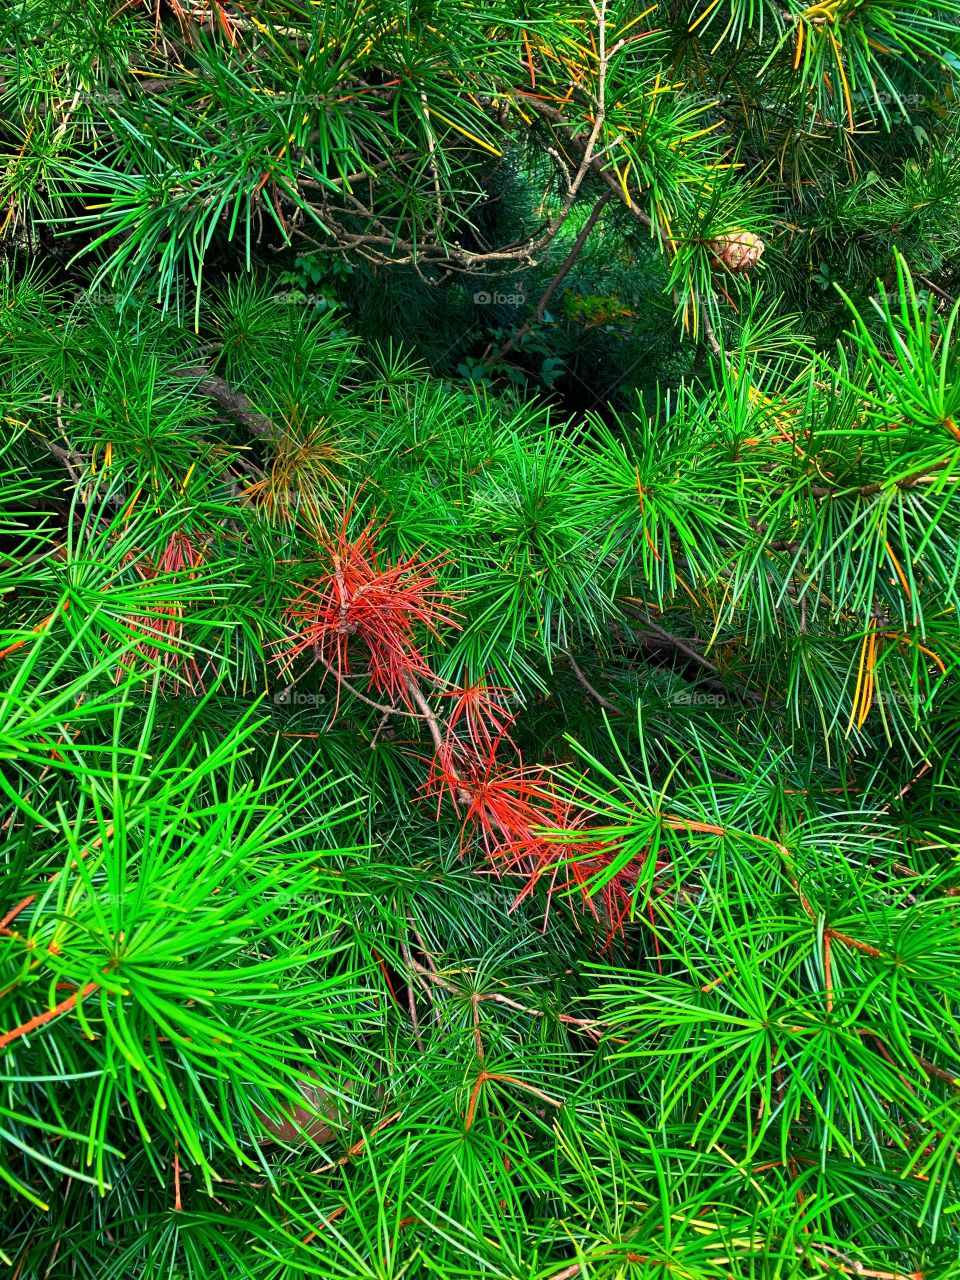 changing colors of pine needles in the summer